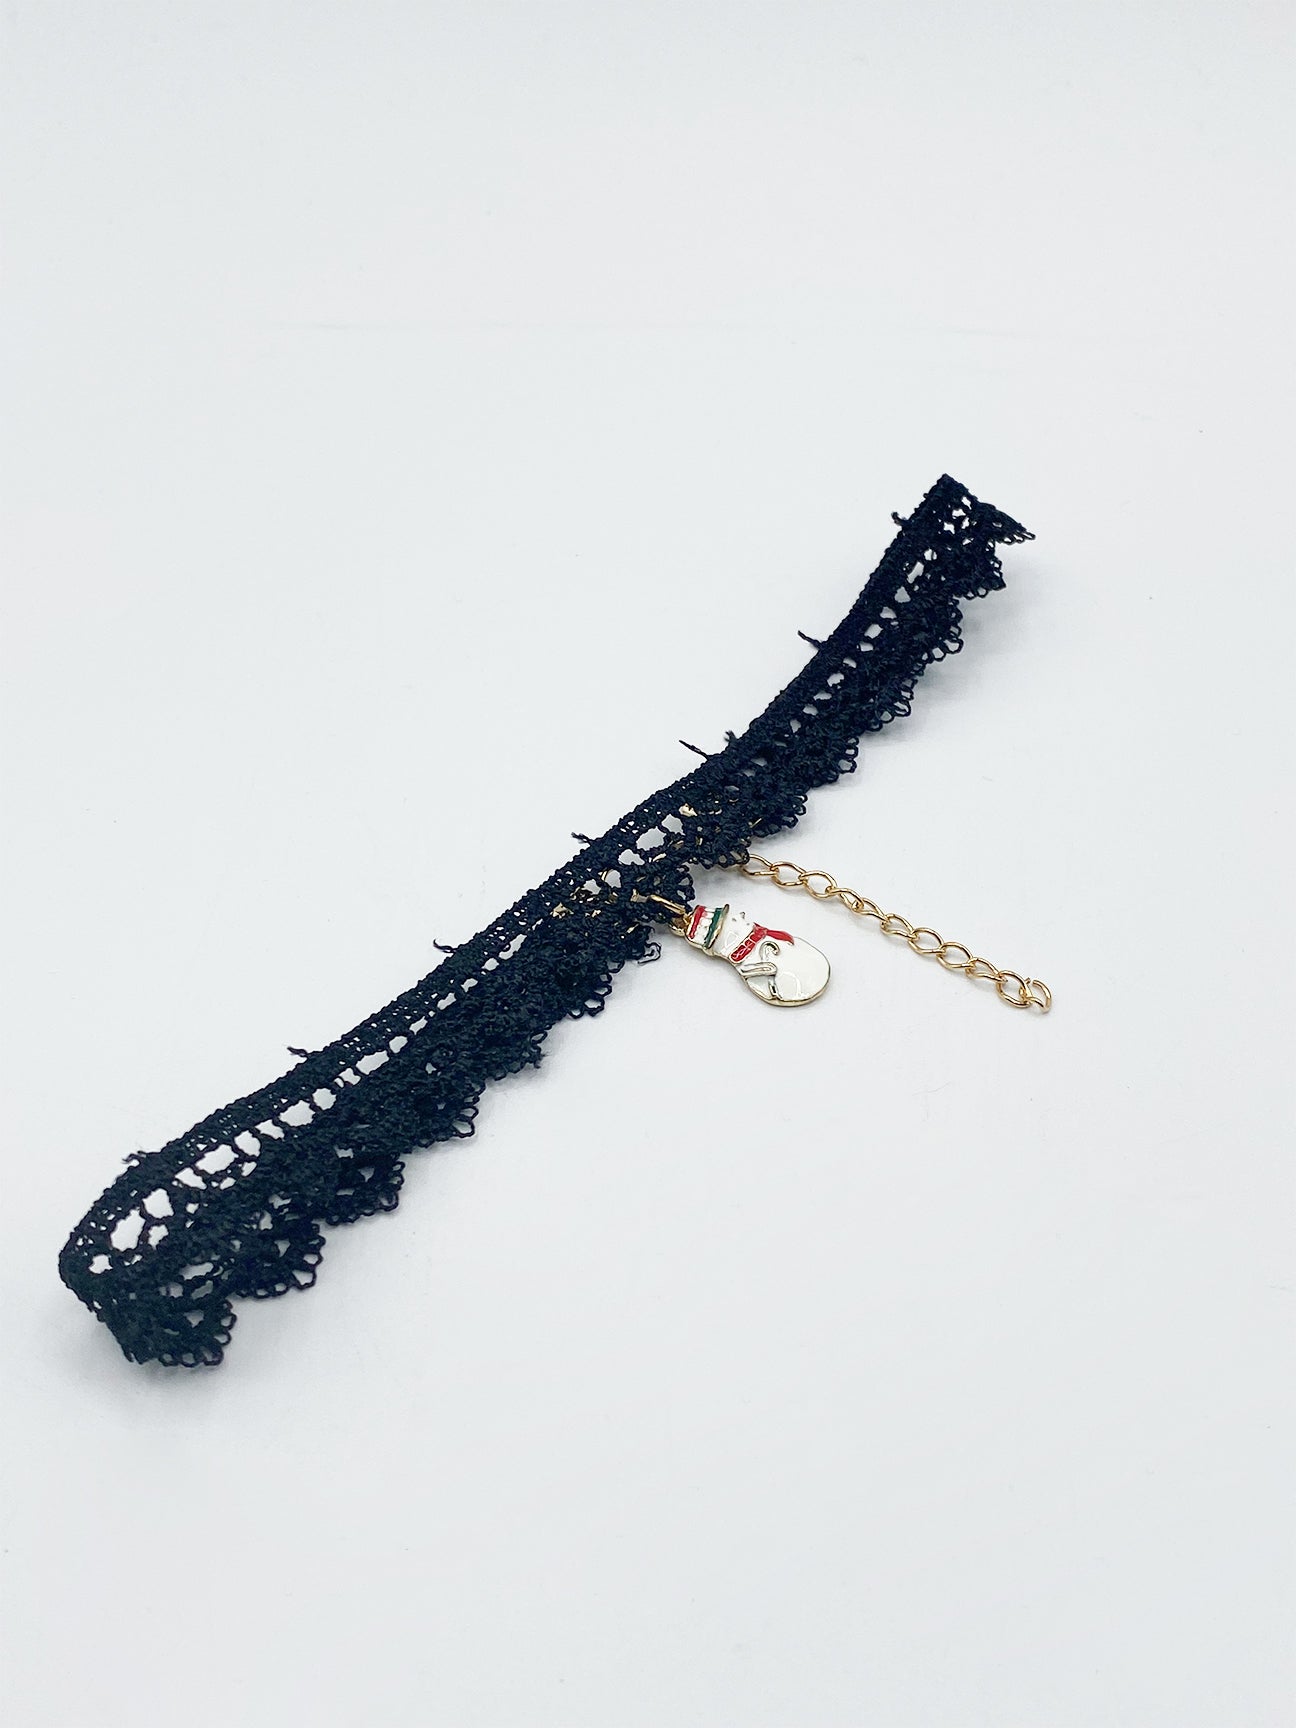 Black Corded Lace Scallop Effect Choker With Snowman Pendant